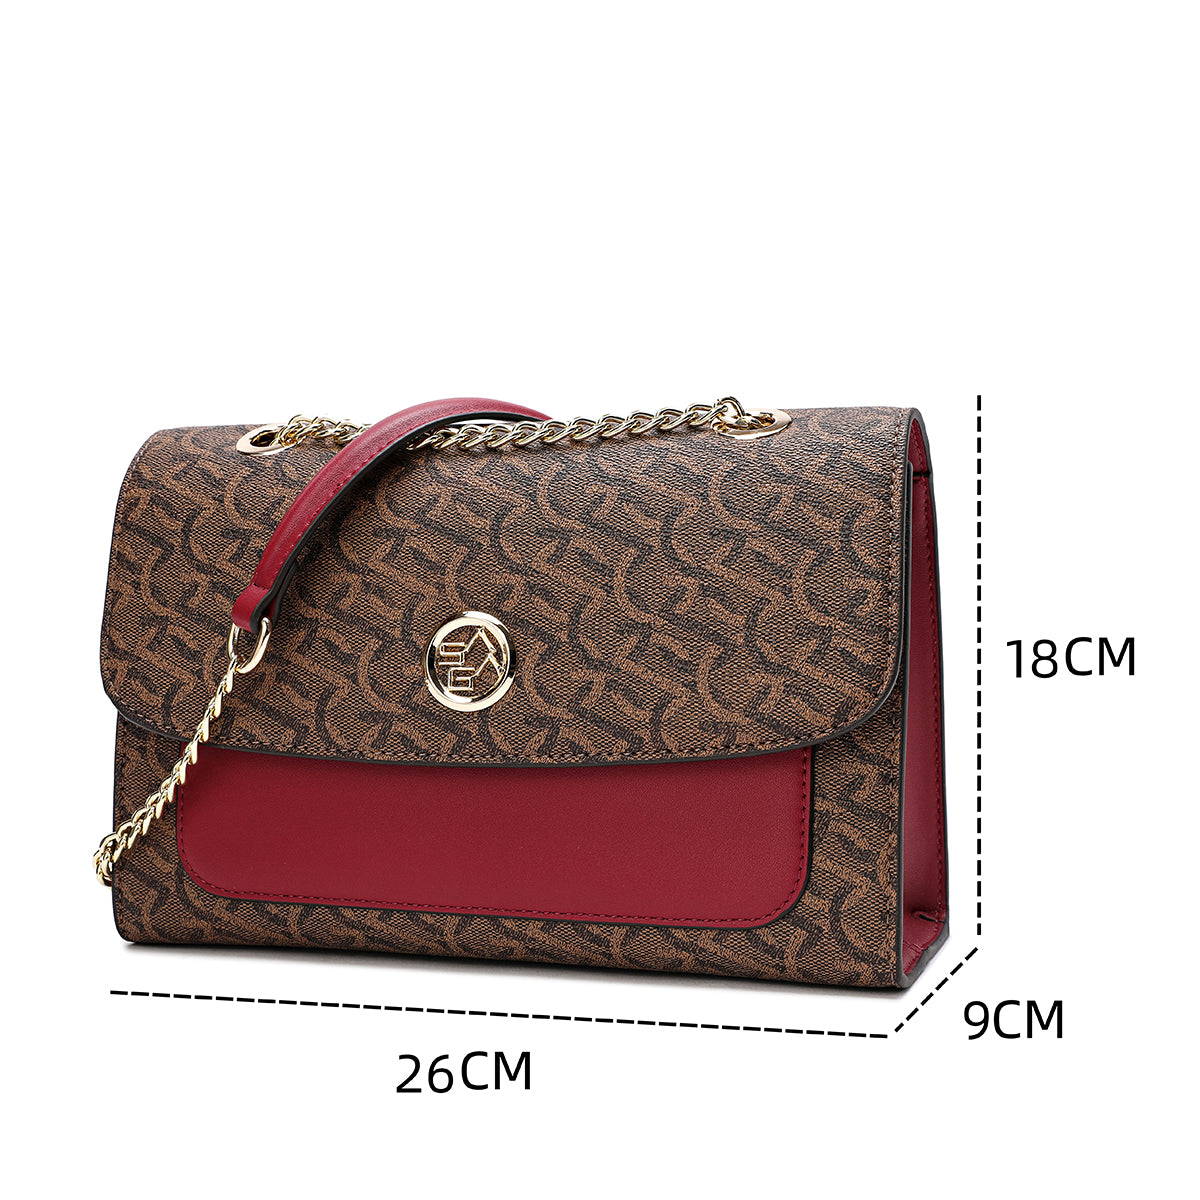 Elegant and practical women's bag, 26 cm wide, in several colors